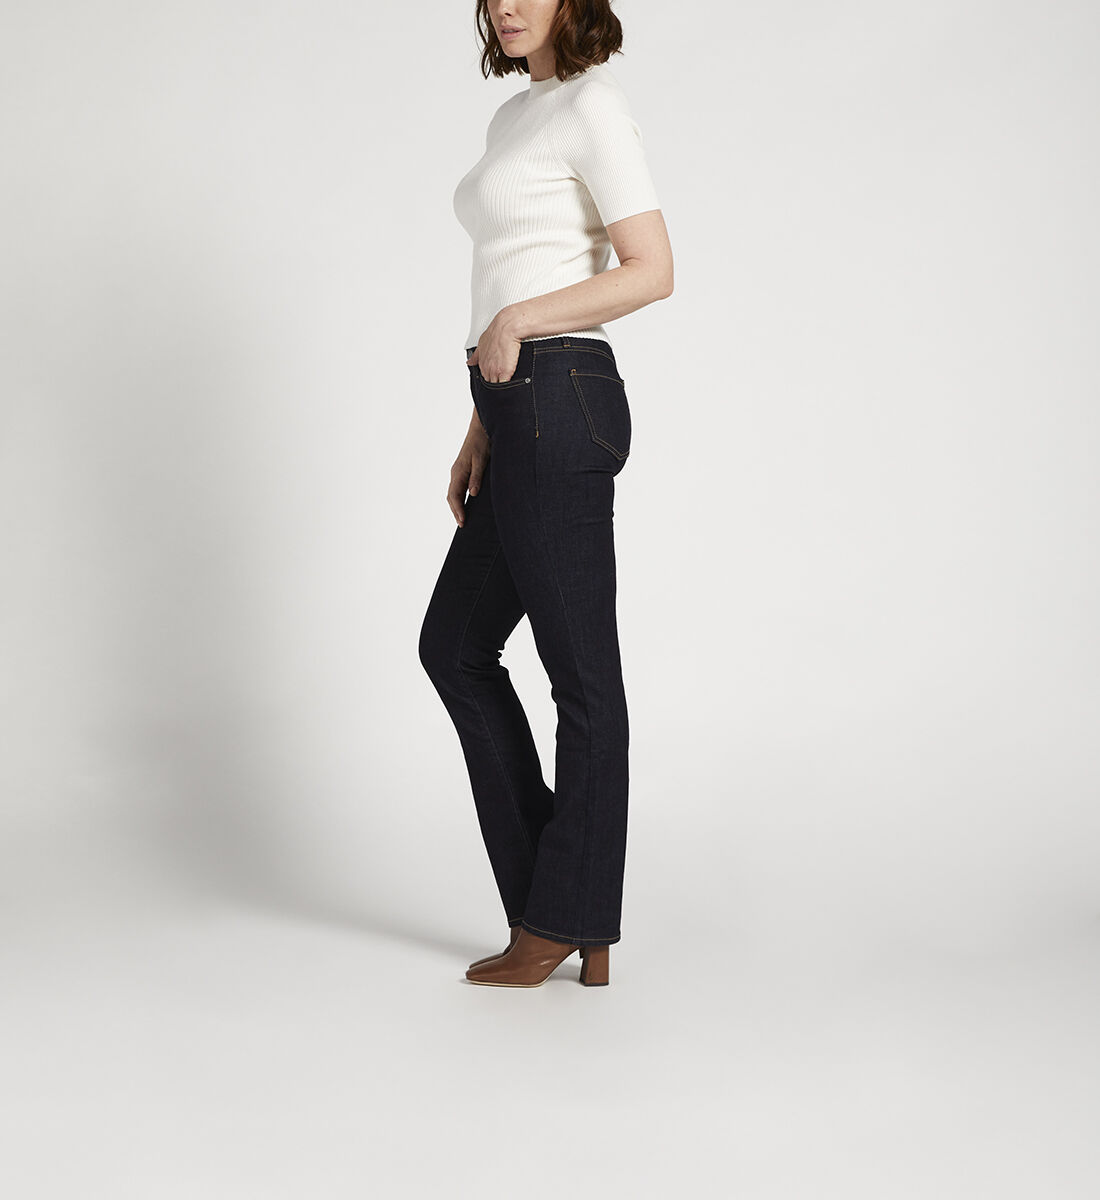 Eloise Mid Rise Bootcut Jeans Side